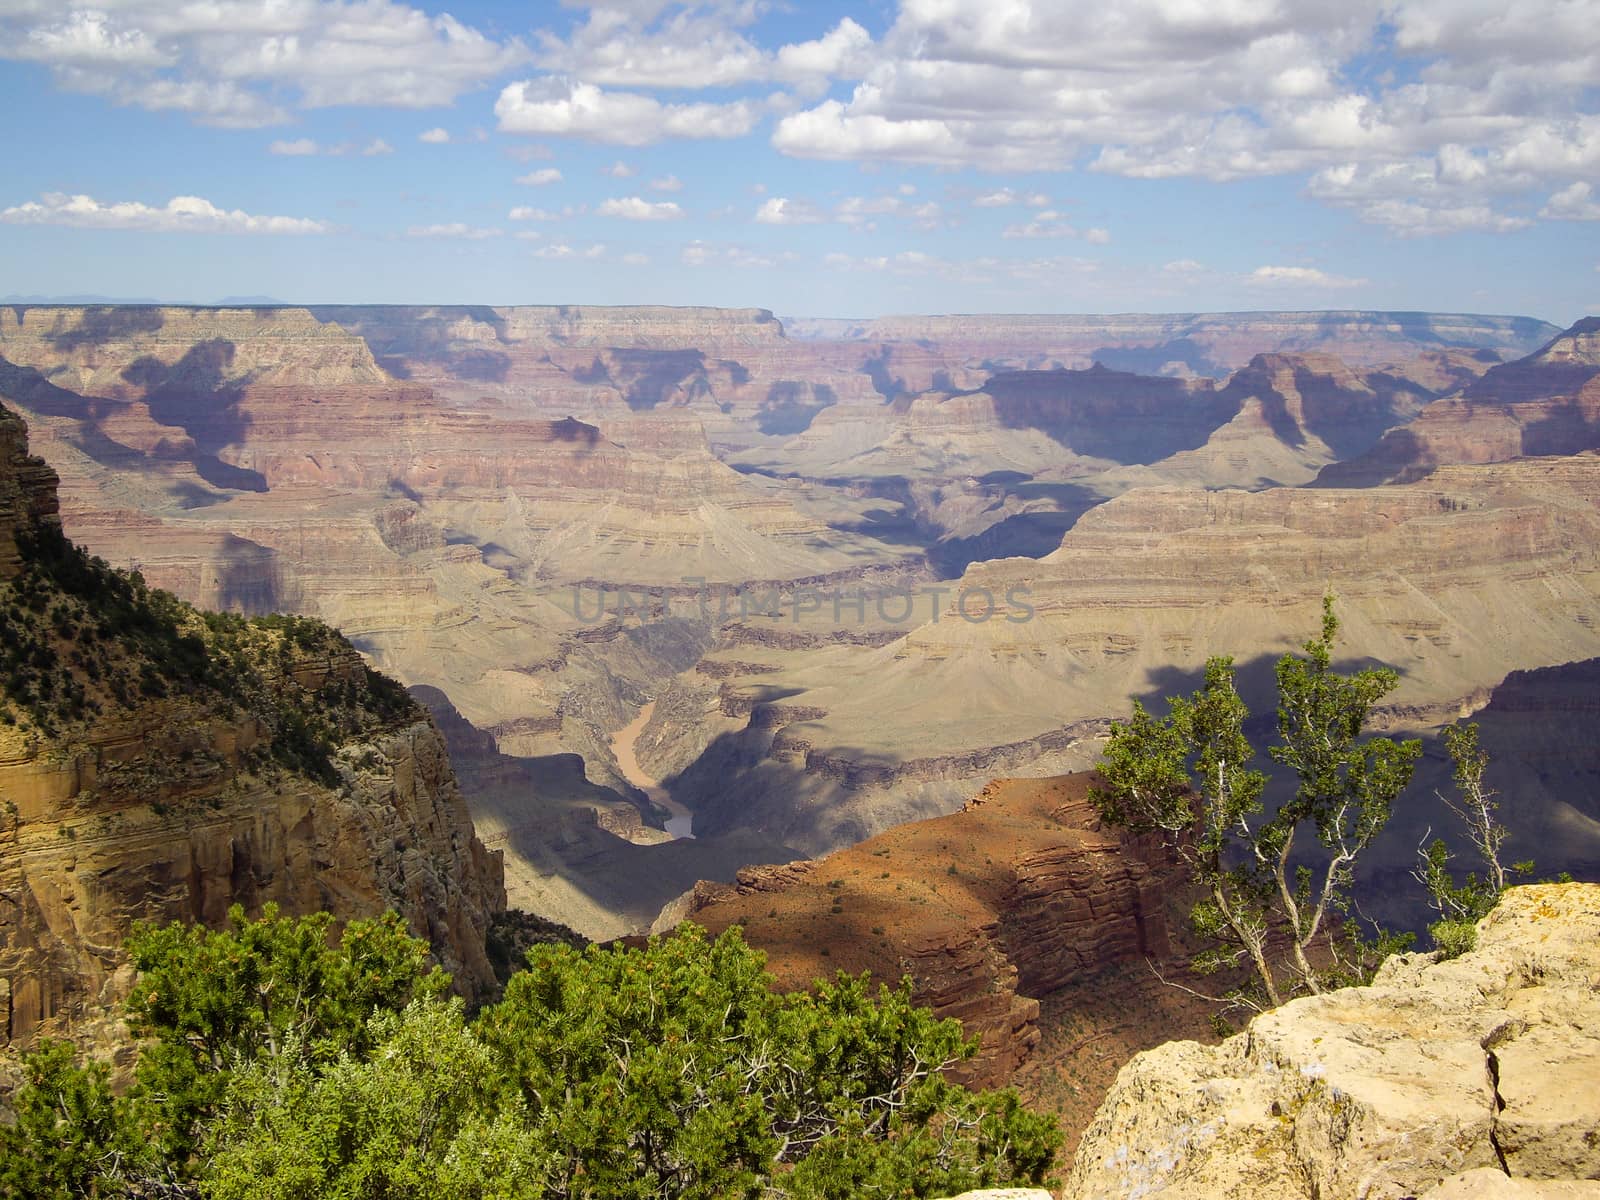 View from the edge of Grand Canyon National Park